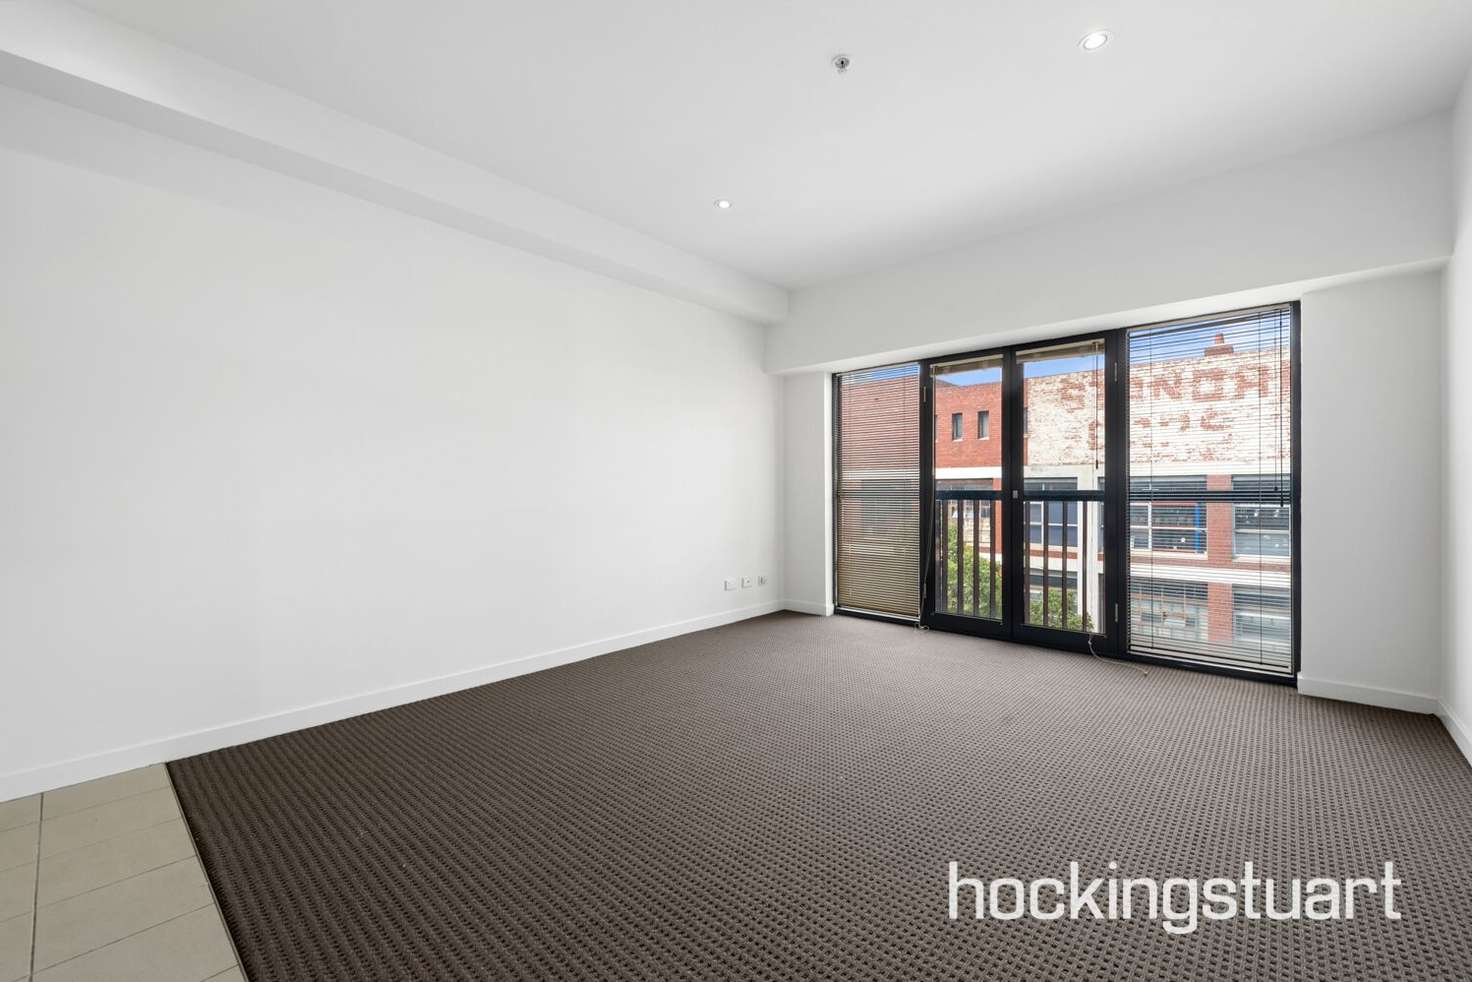 Main view of Homely apartment listing, 213/29 O'Connell Street, North Melbourne VIC 3051